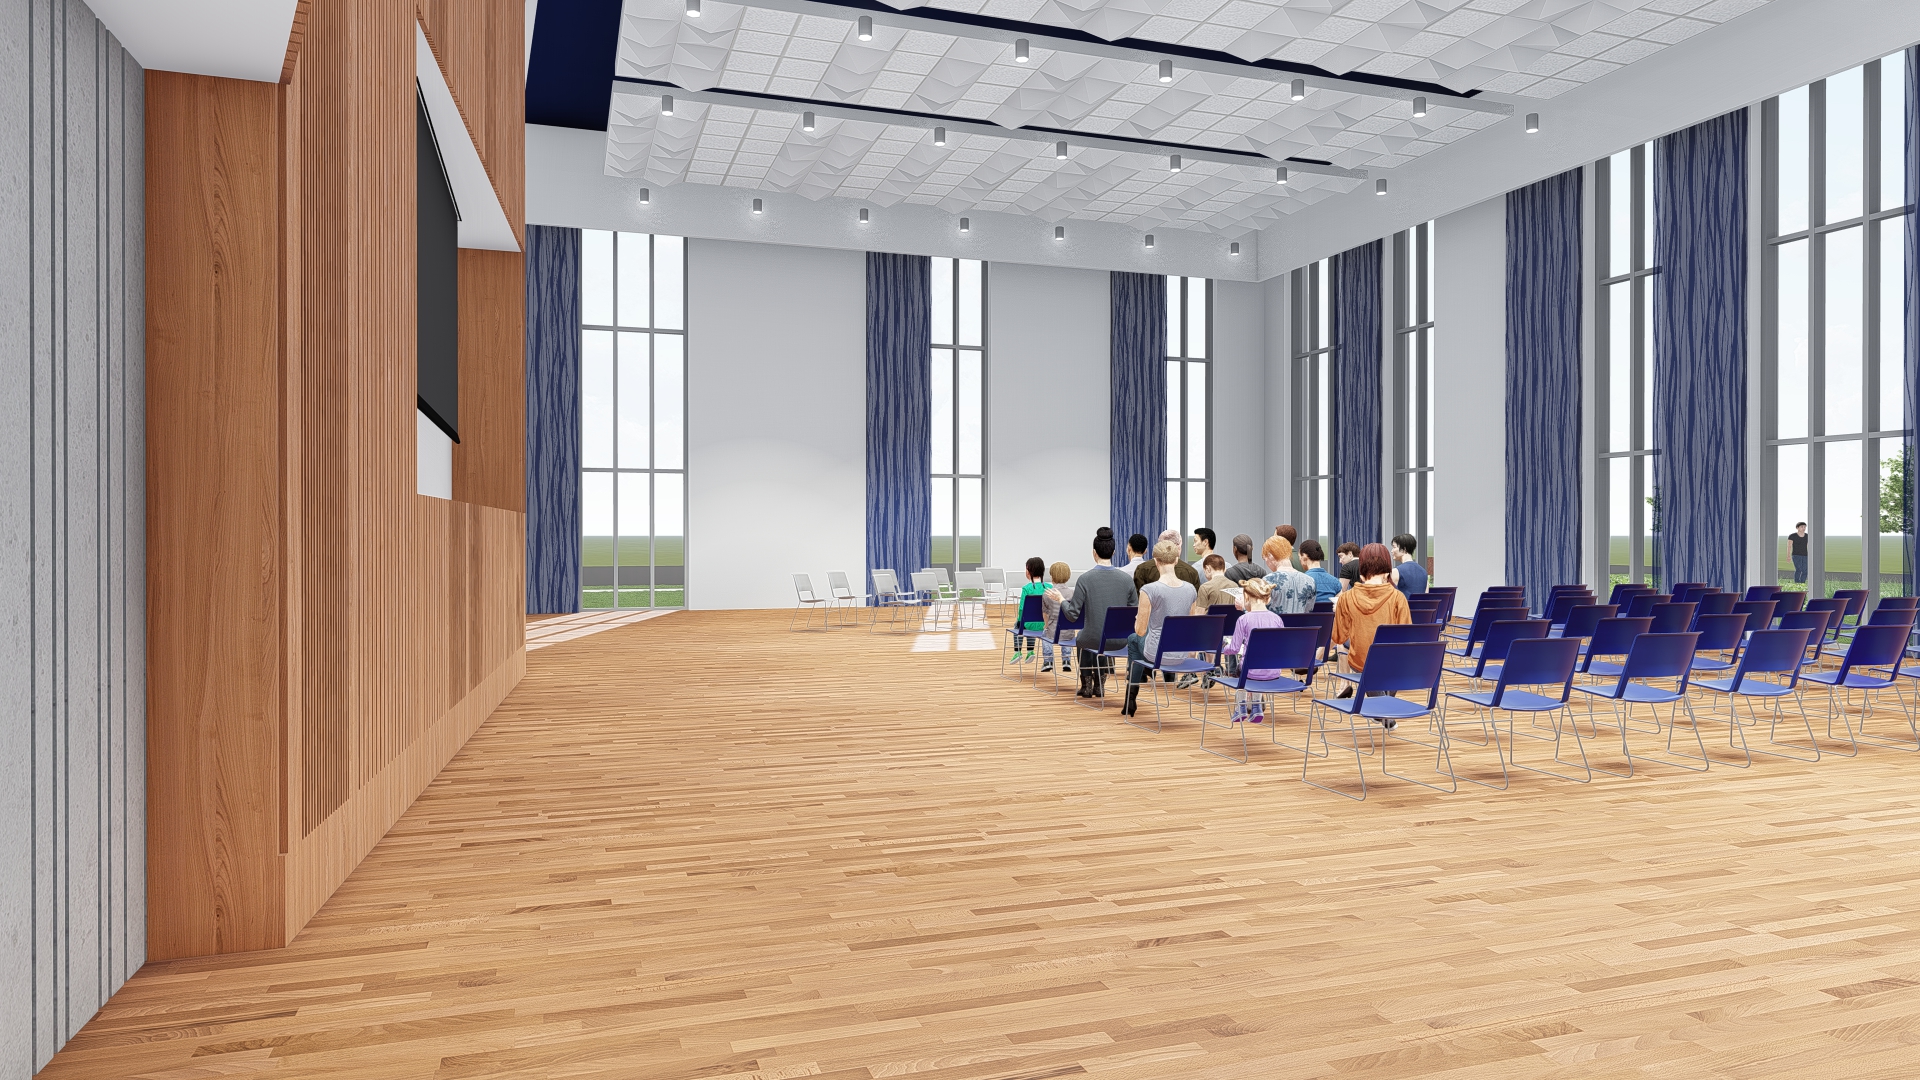 rendering of rehearsal hall with seated people